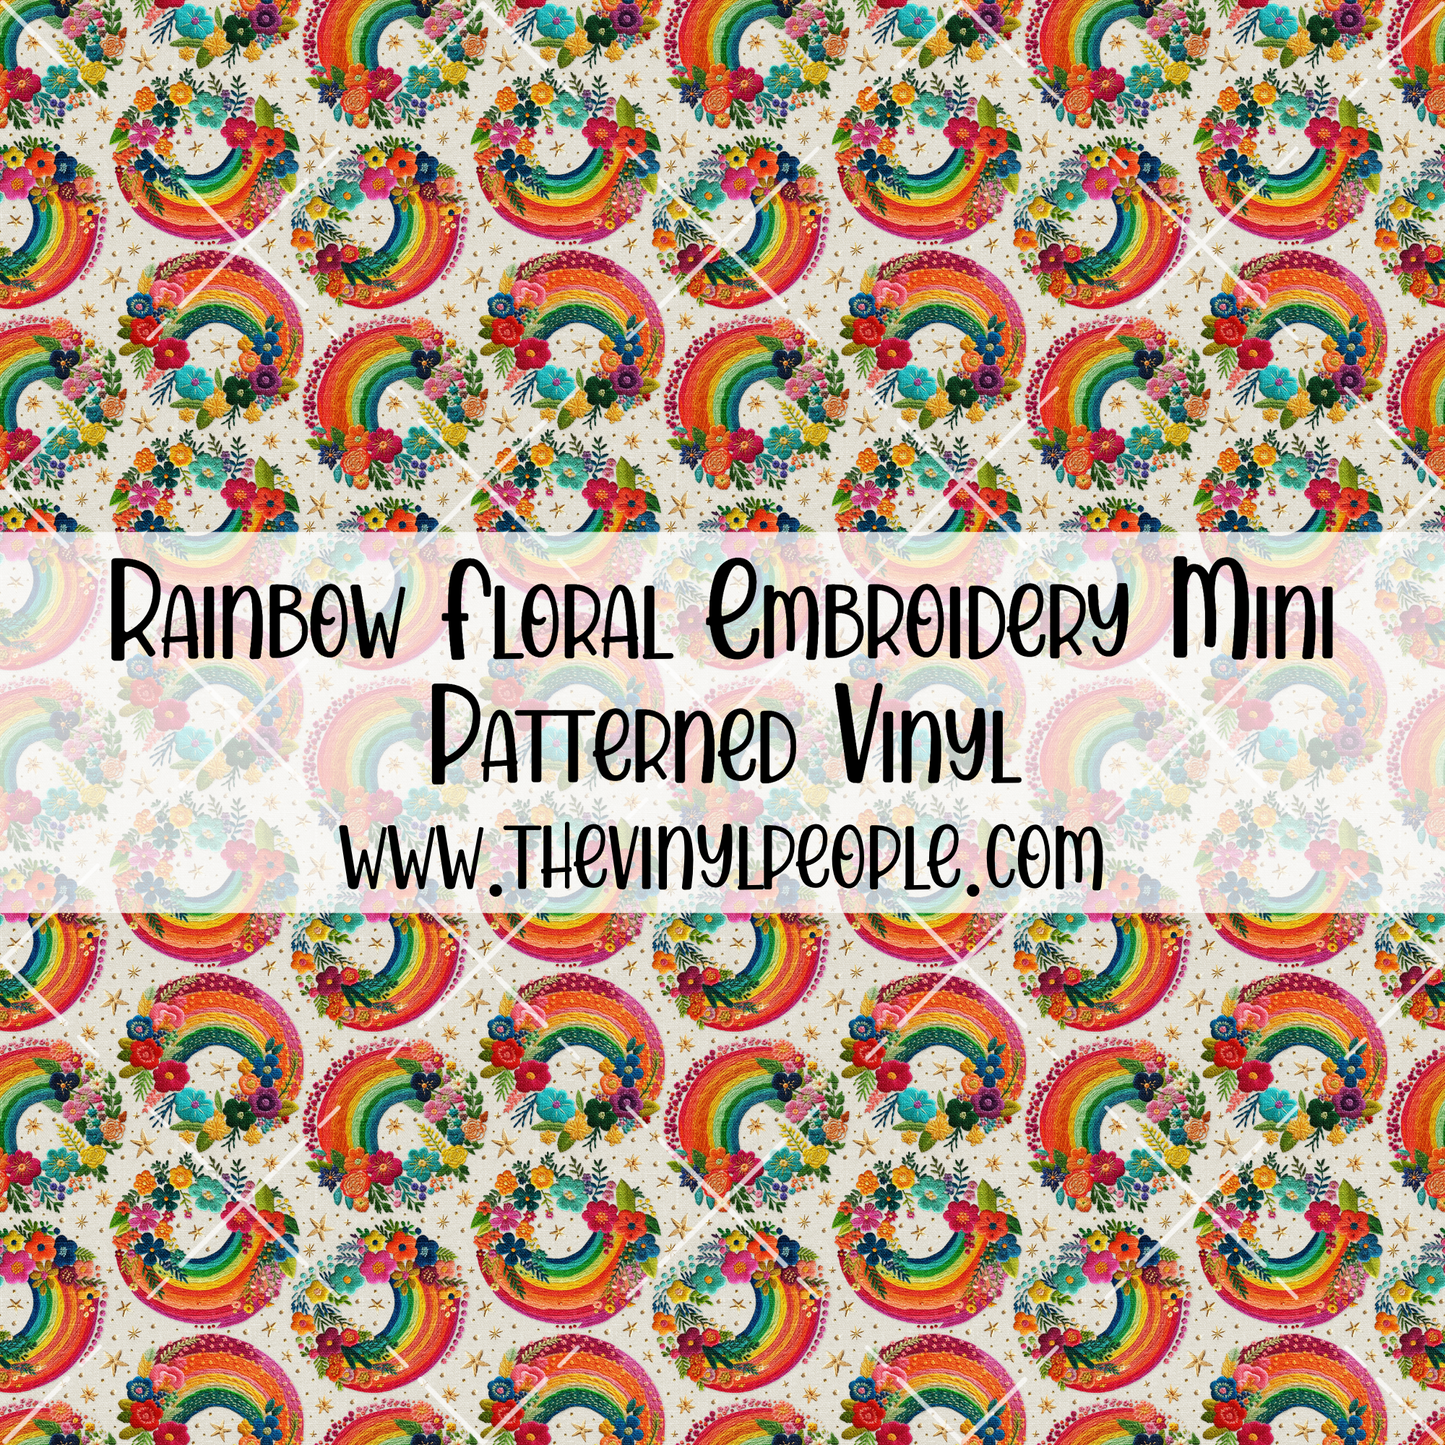 Rainbow Floral Embroidery Patterned Vinyl